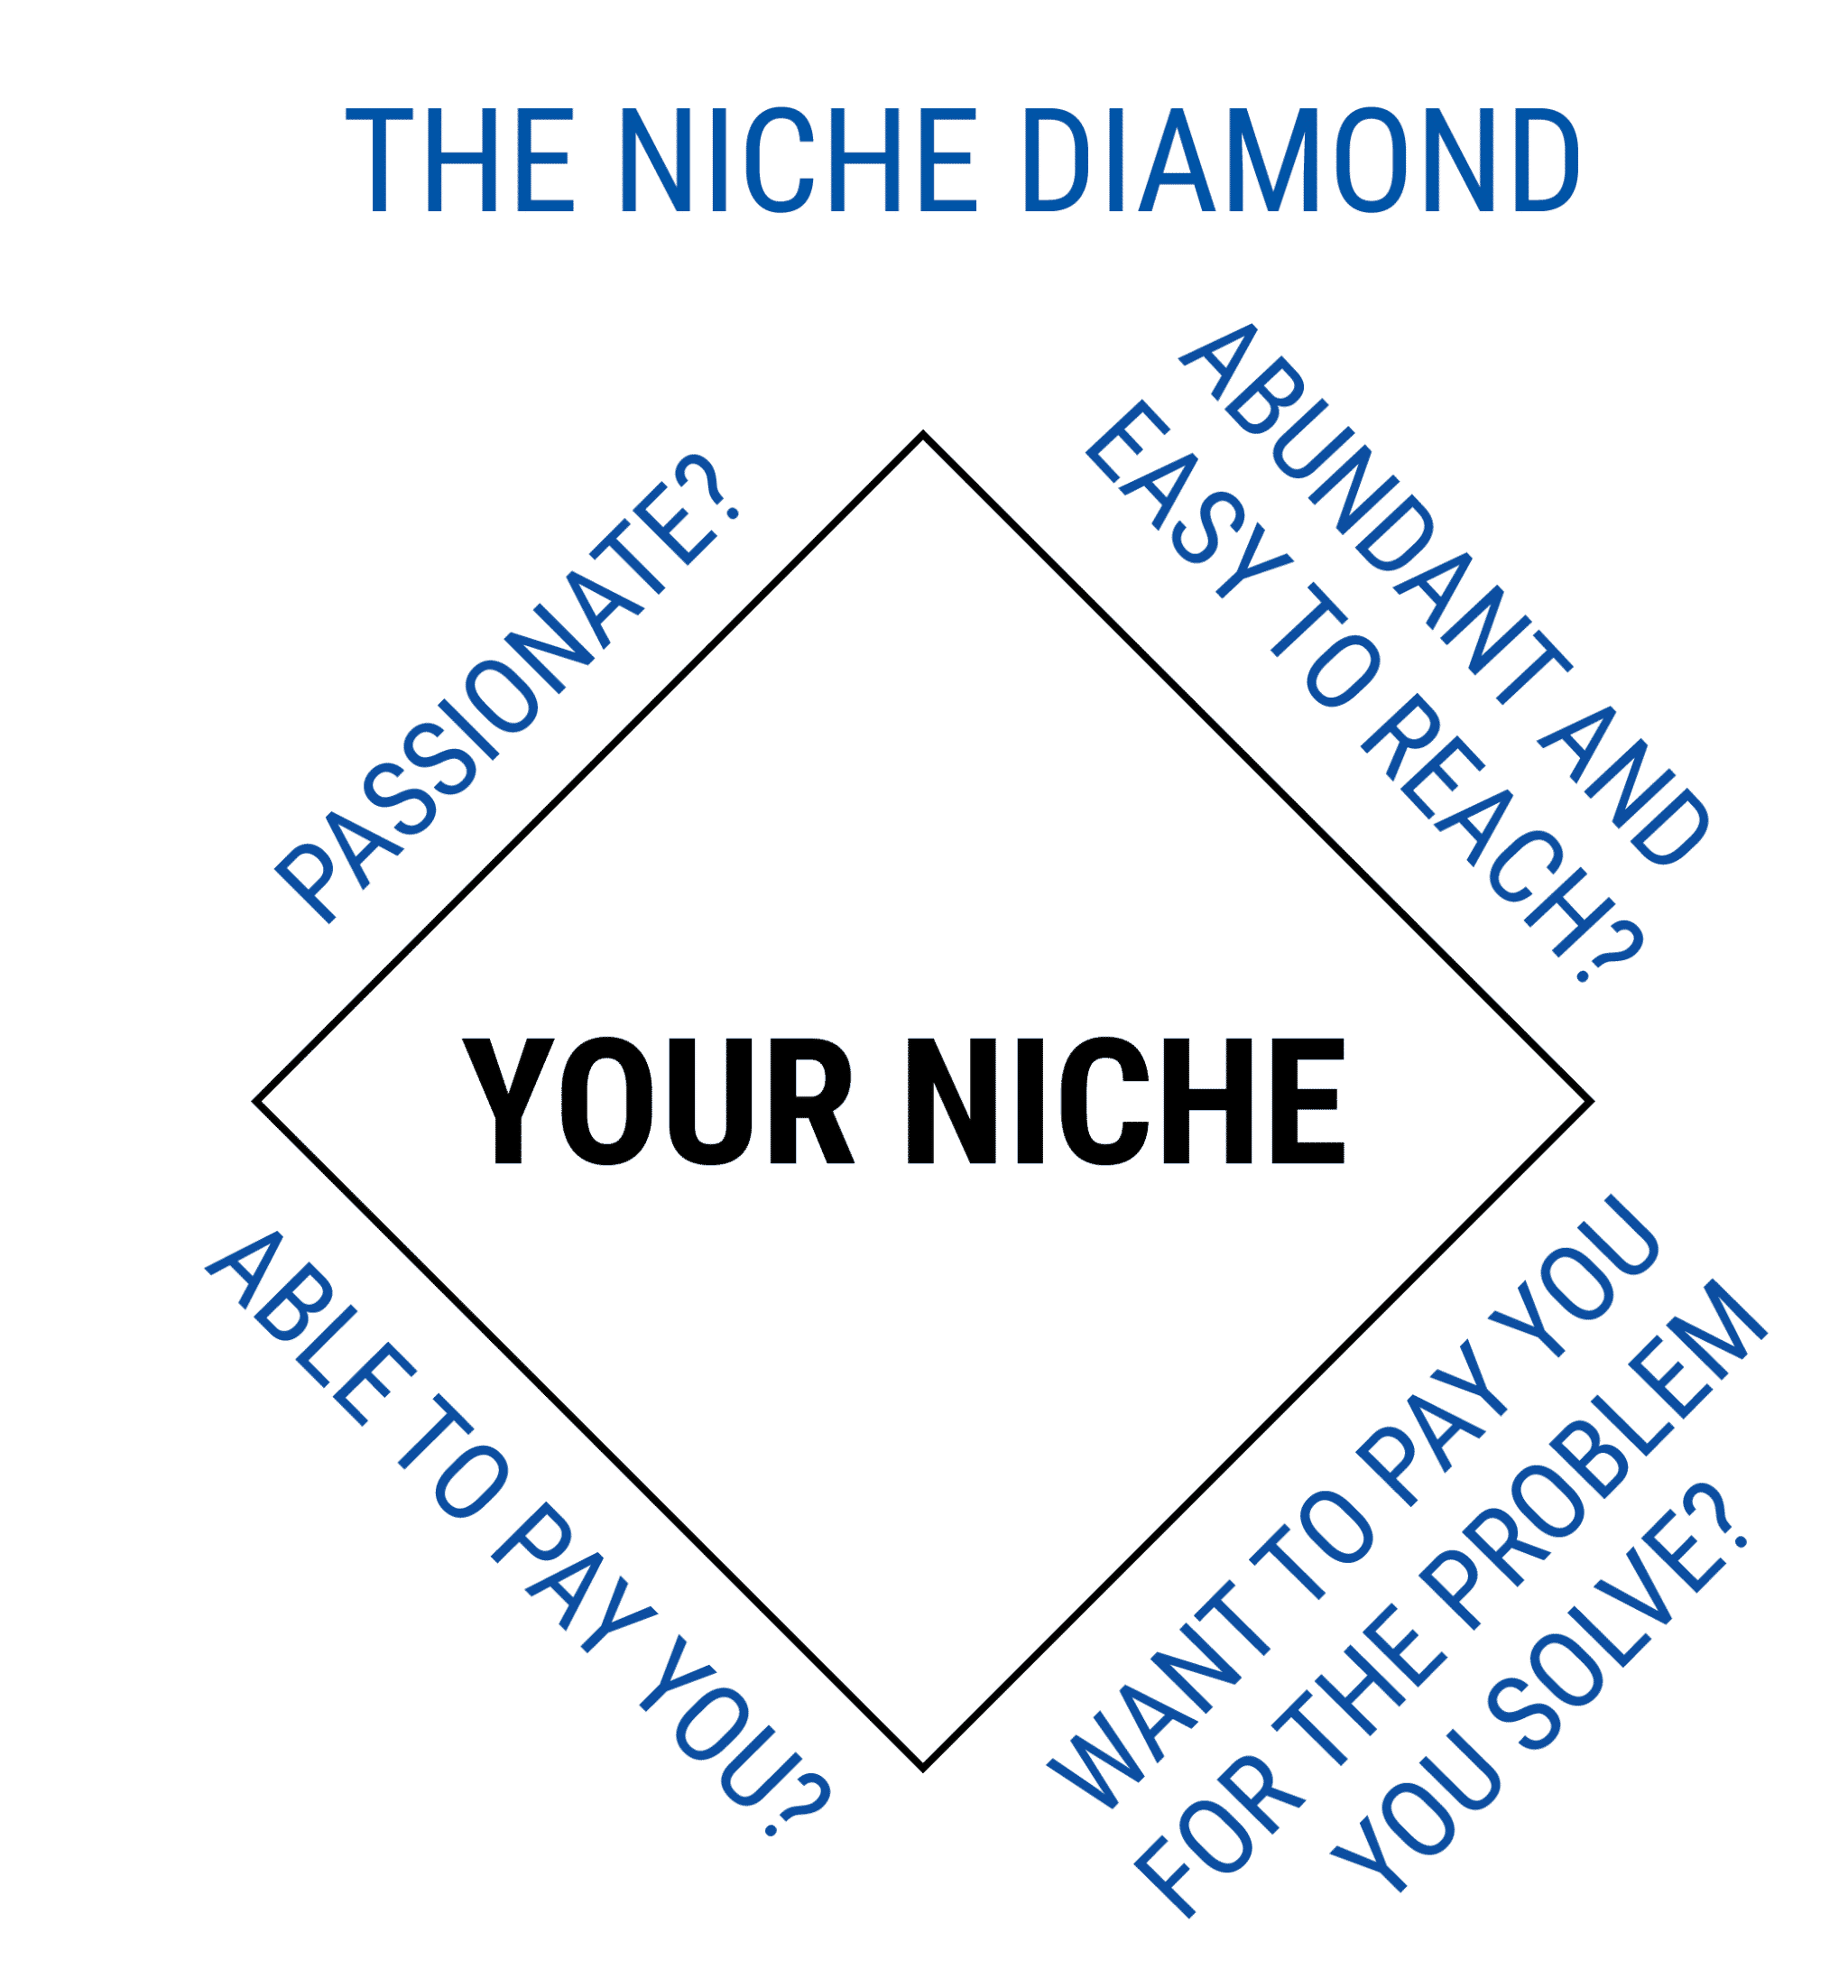 the niche diamond - starting a coaching business while working full-time